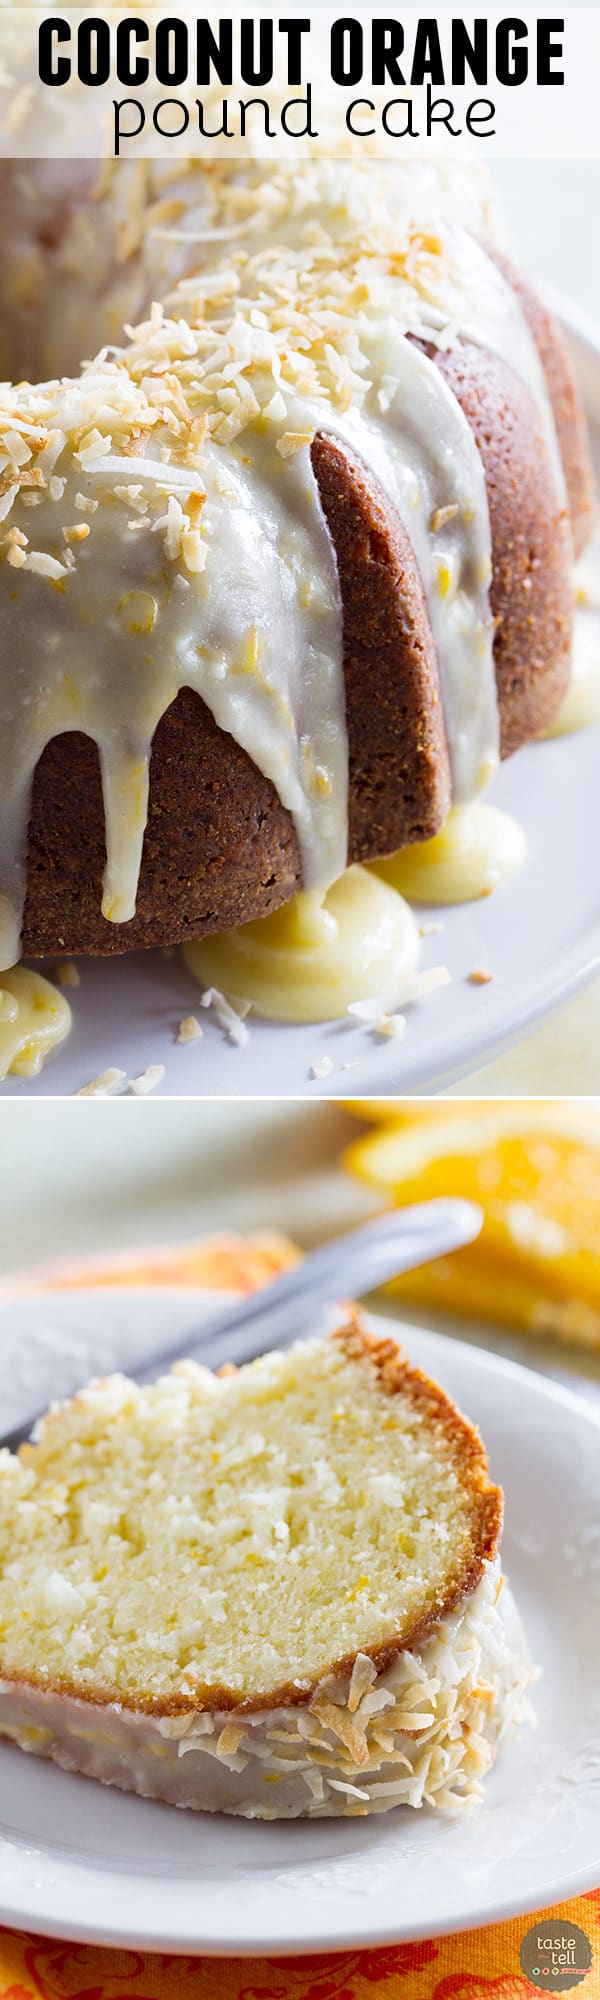 Rich and full of orange and coconut flavors, this Coconut Orange Pound Cake takes a classic recipe and gives it is tropical makeover.